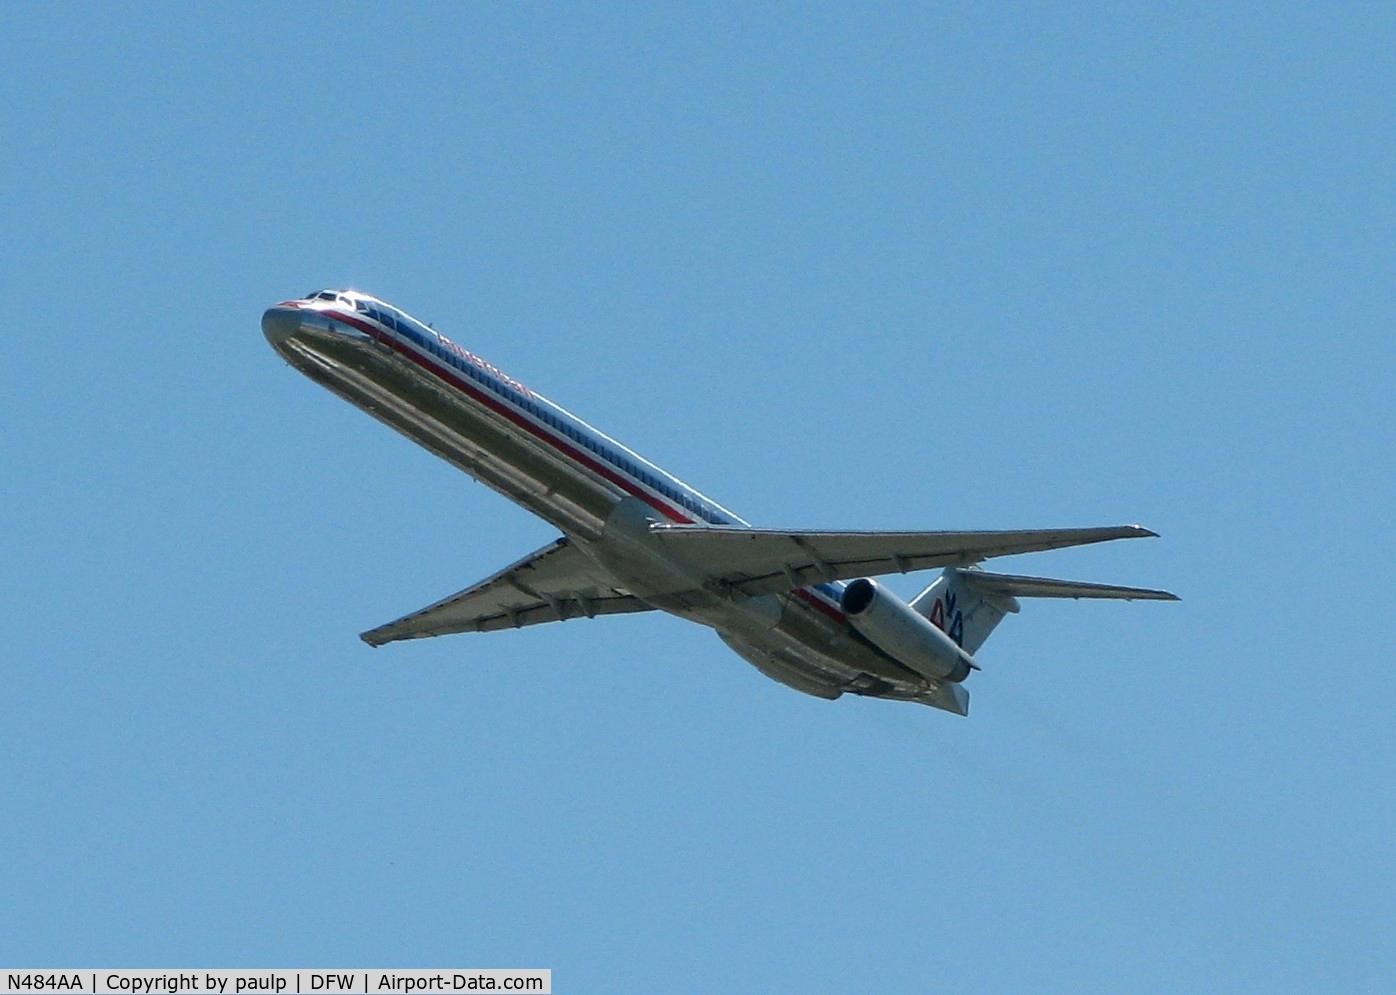 N484AA, 1988 McDonnell Douglas MD-82 (DC-9-82) C/N 49677, Off of 36R at DFW.